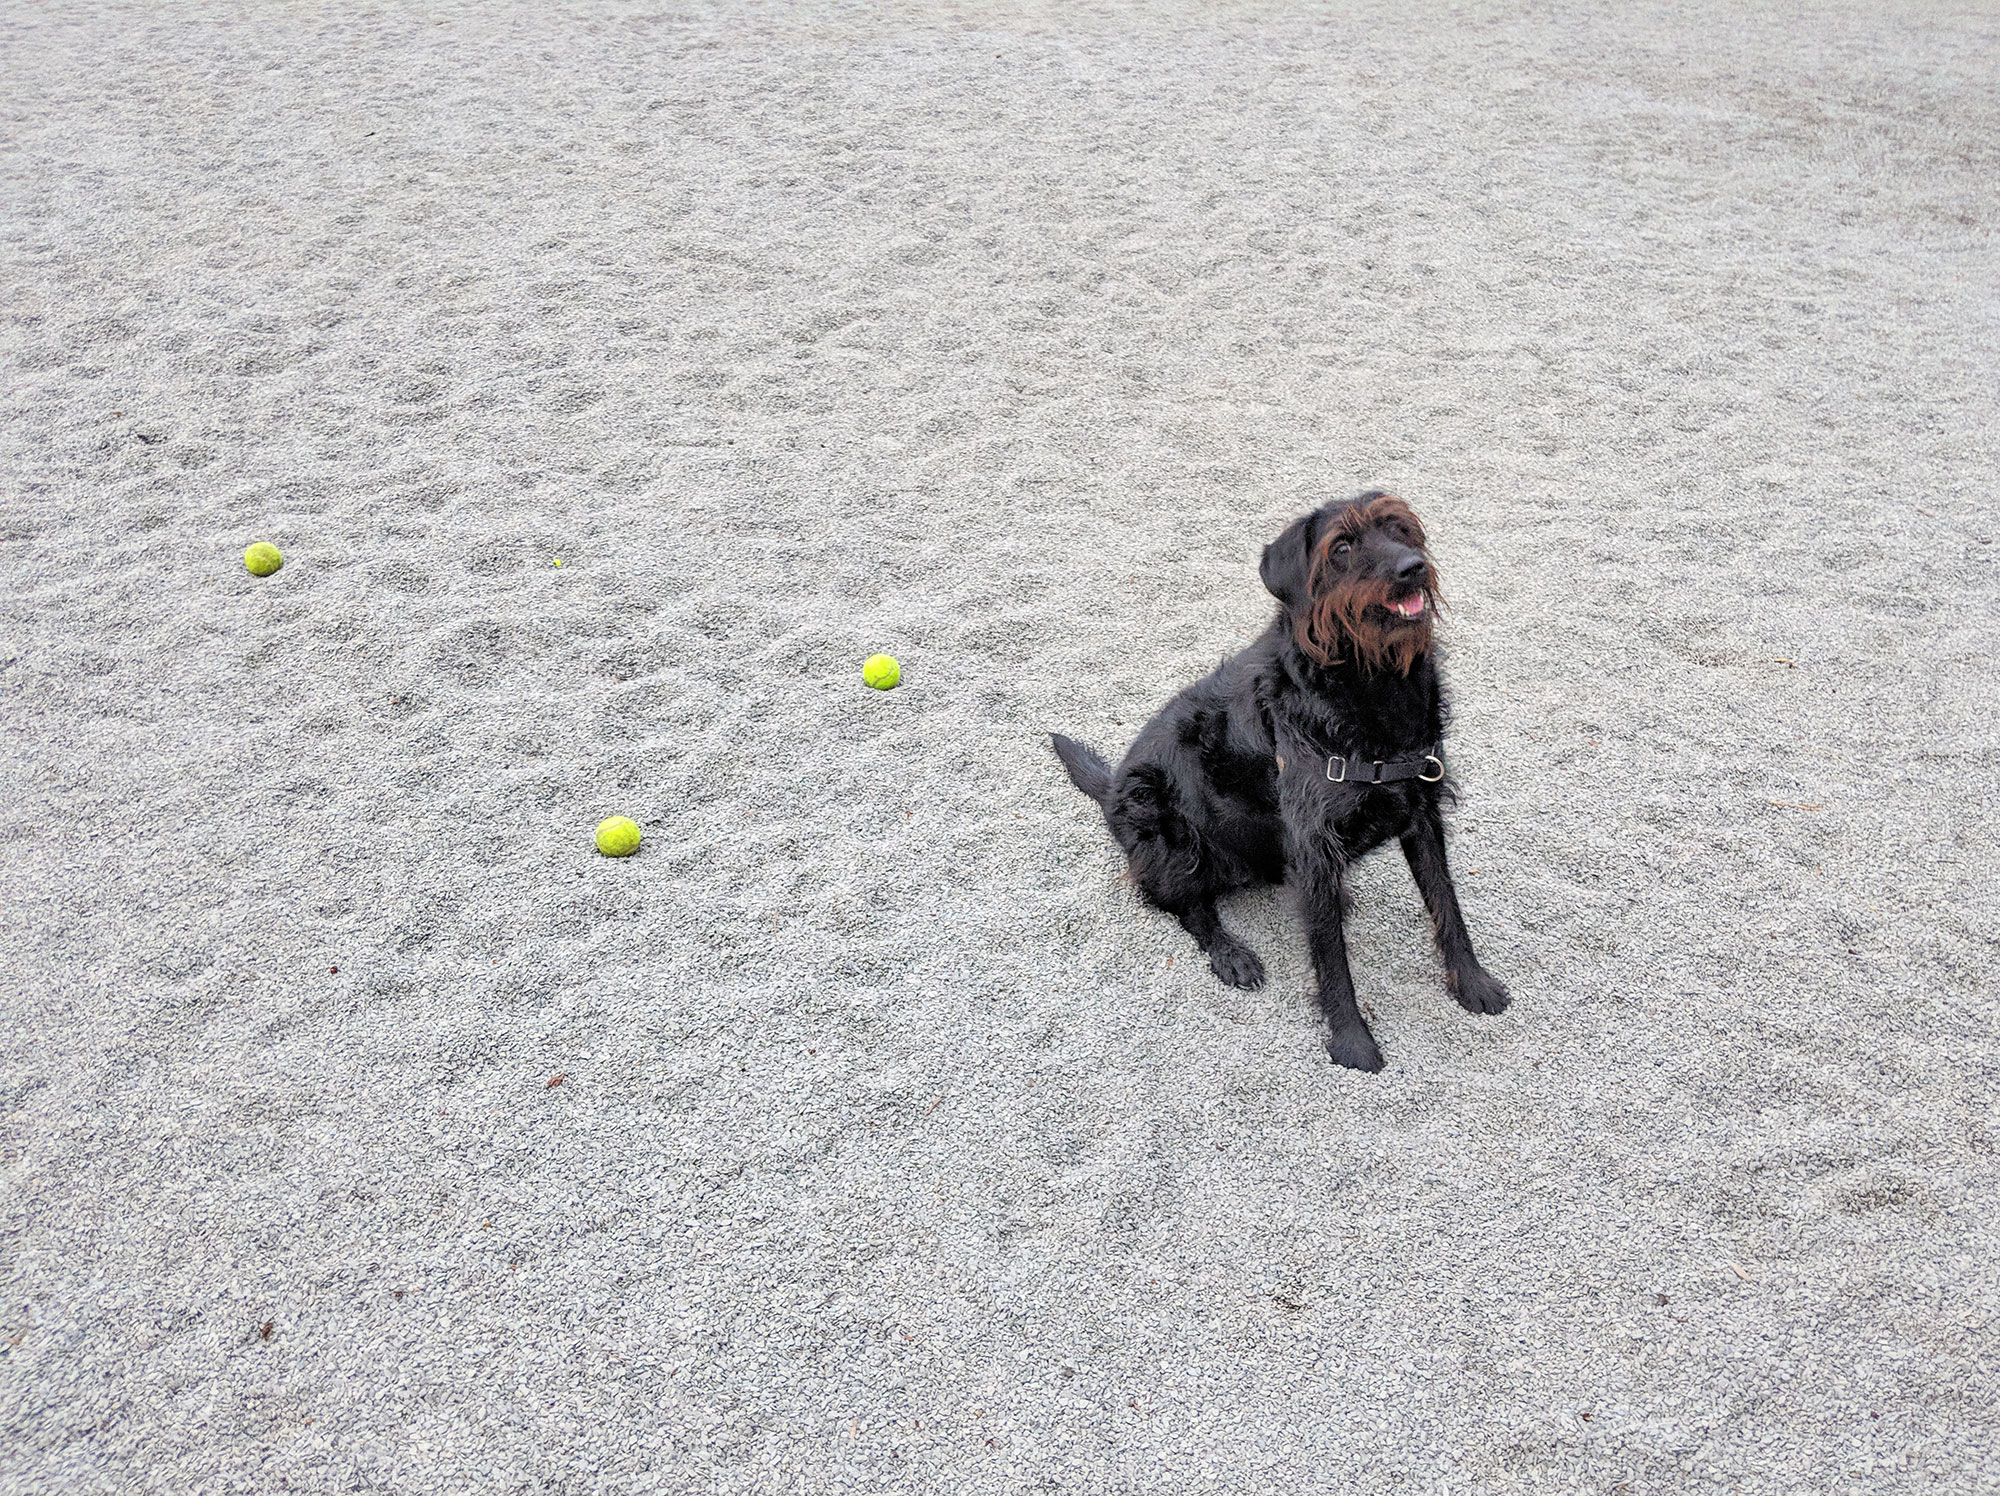 Ingrid the labradoodle not choosing a tennis ball at the dog park.